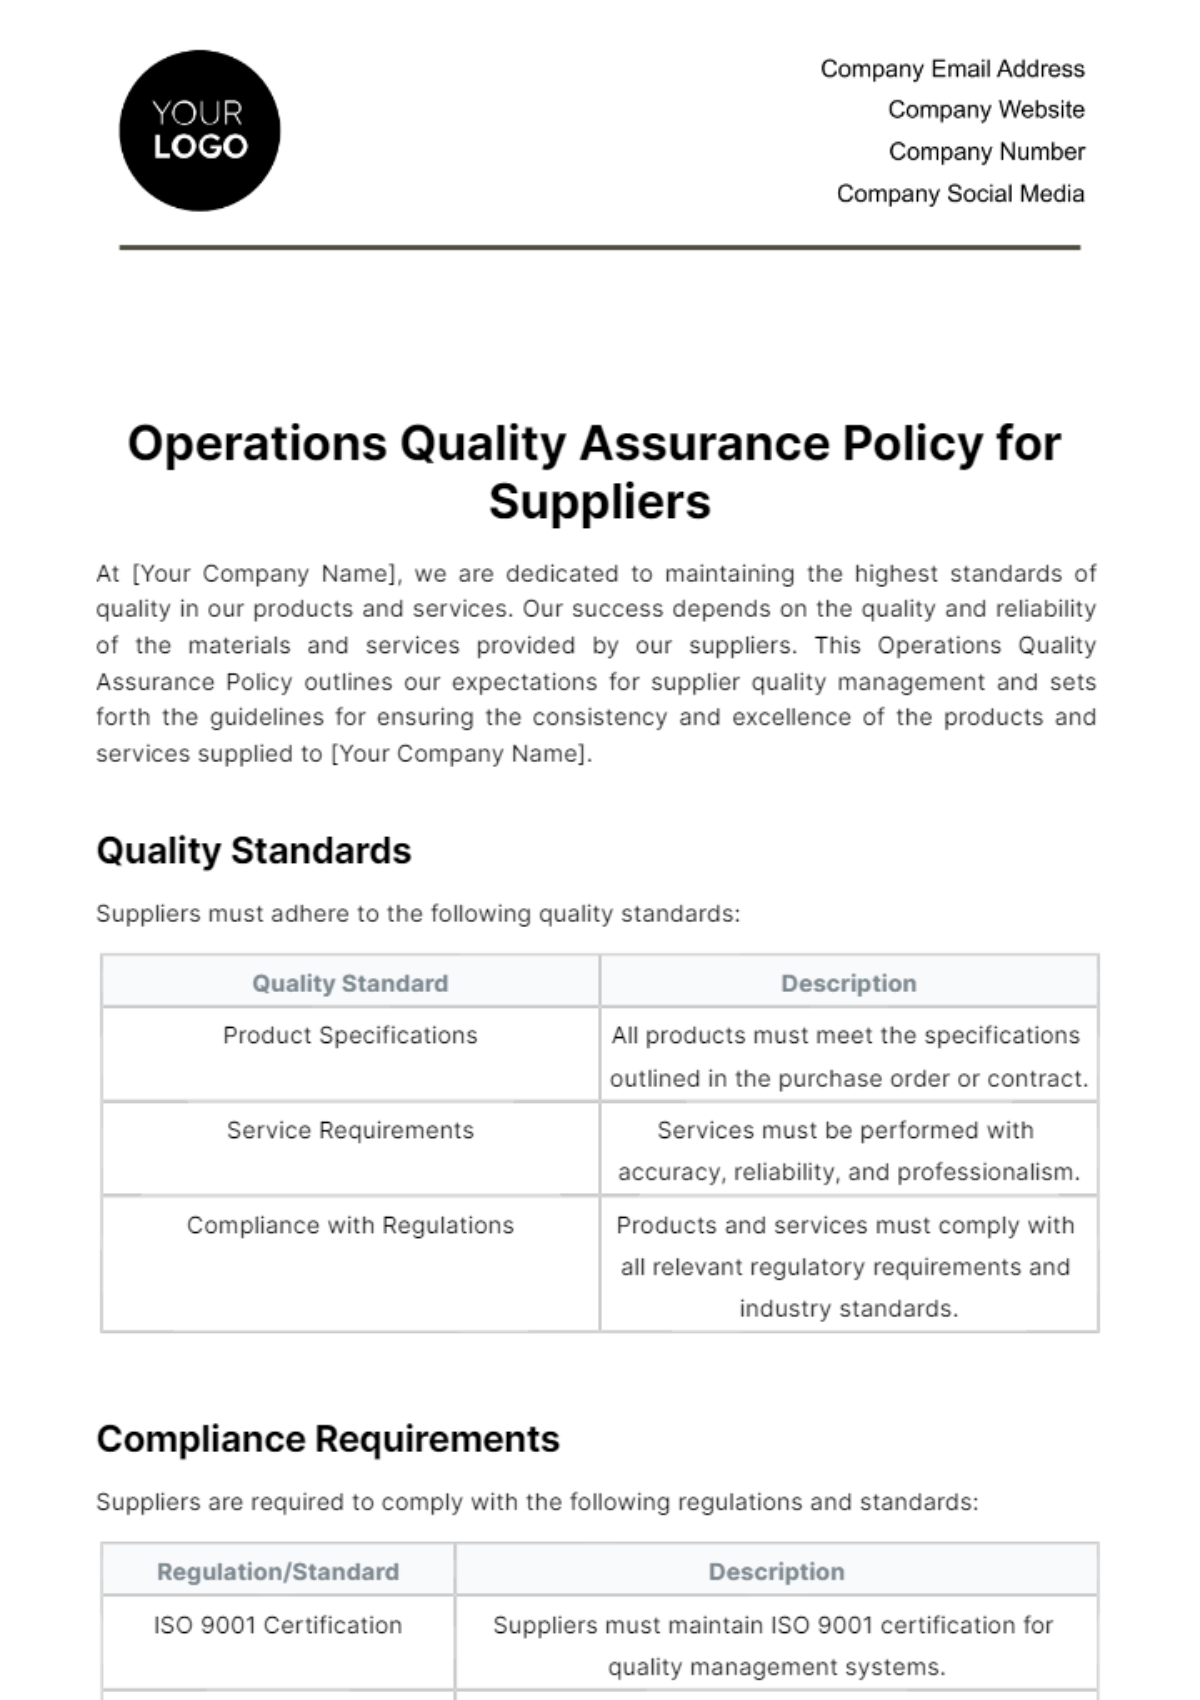 Free Operations Quality Assurance Policy for Suppliers Template